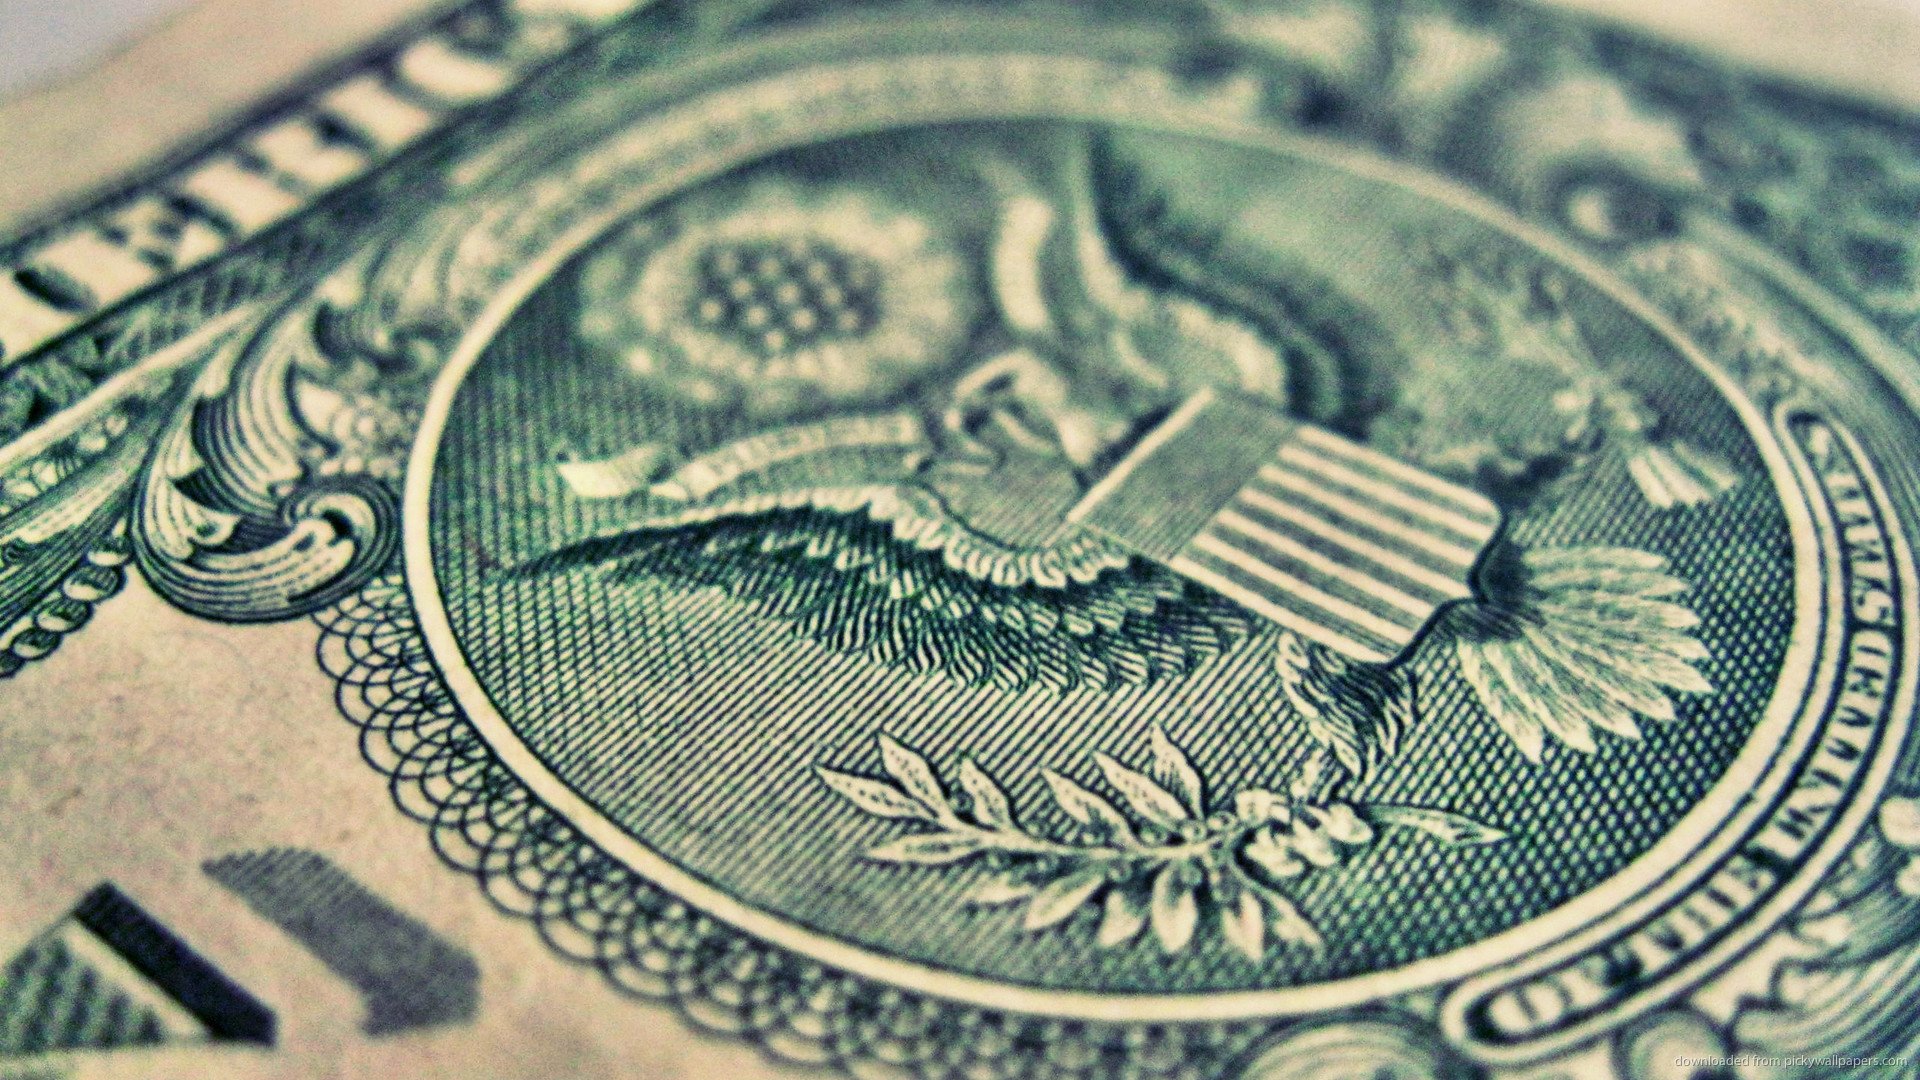 1920x1080 Usa-coat-of-arms-on-money-background